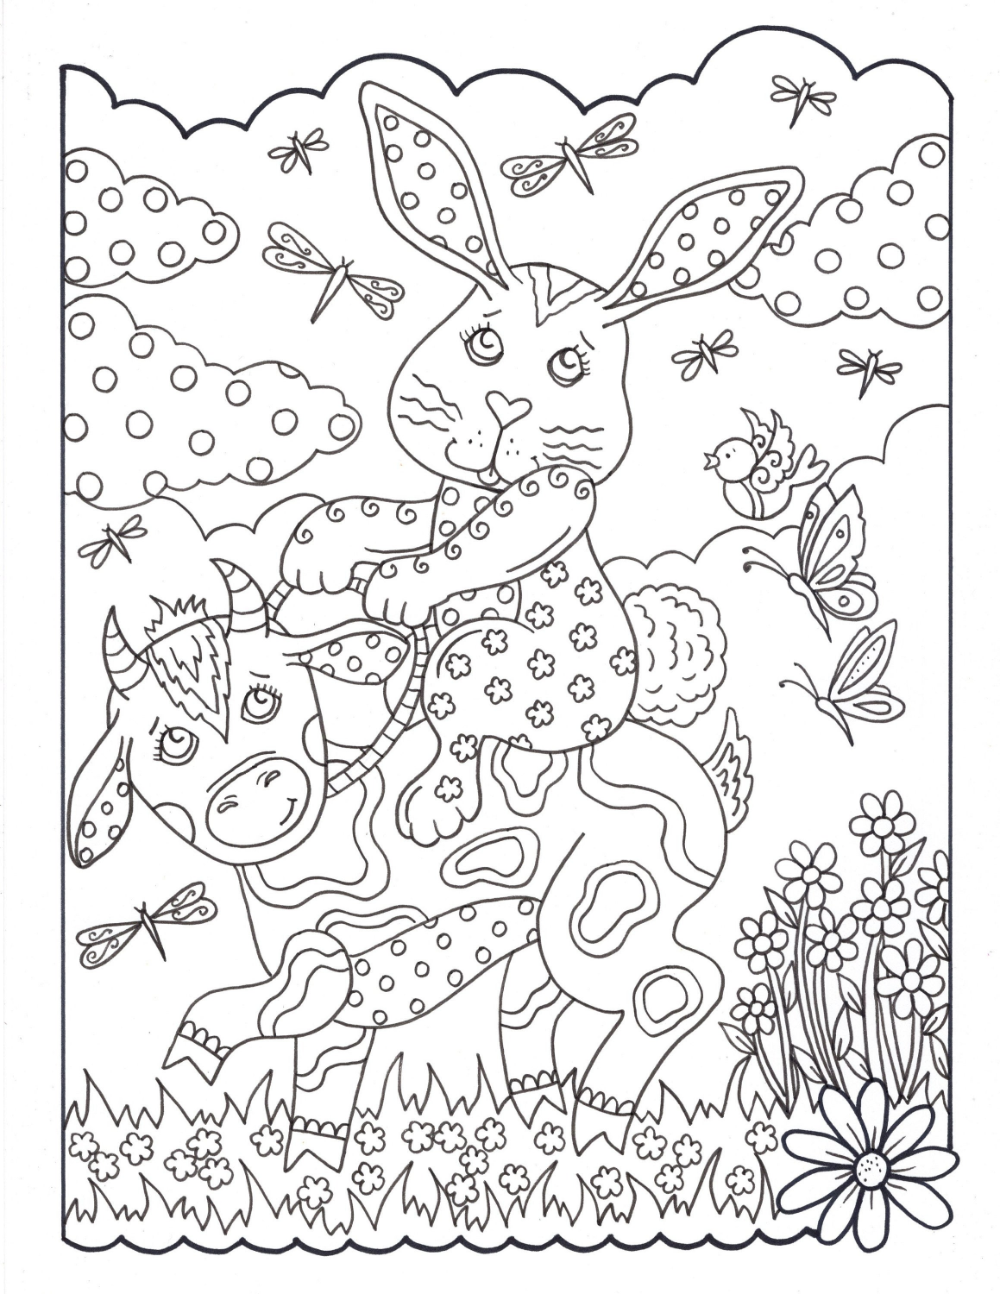 Bunny Love 10 Digital Coloring Pages Downloads Digi Stamps Color Pages Easter Colorin